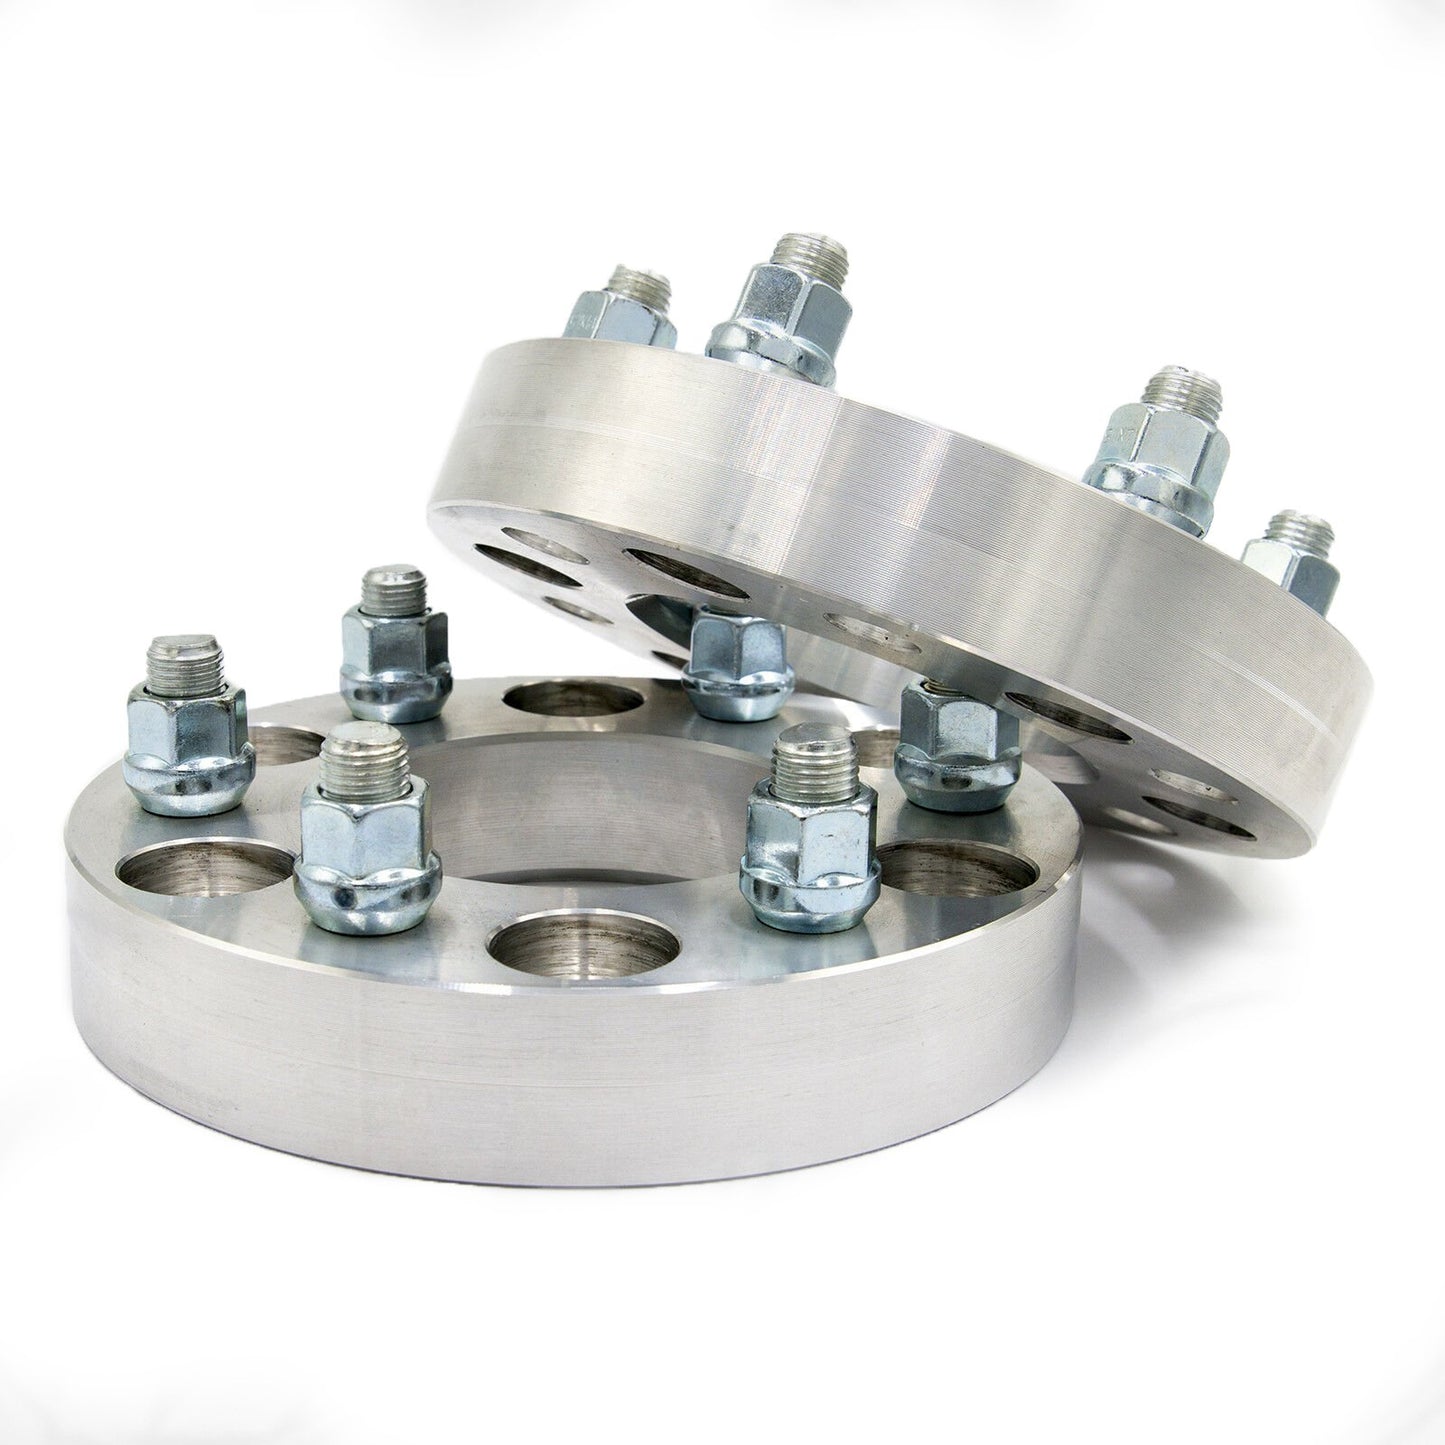 6x132 to 6x132 Wheel Spacer/Adapter - Thickness: 3/4"- 4"